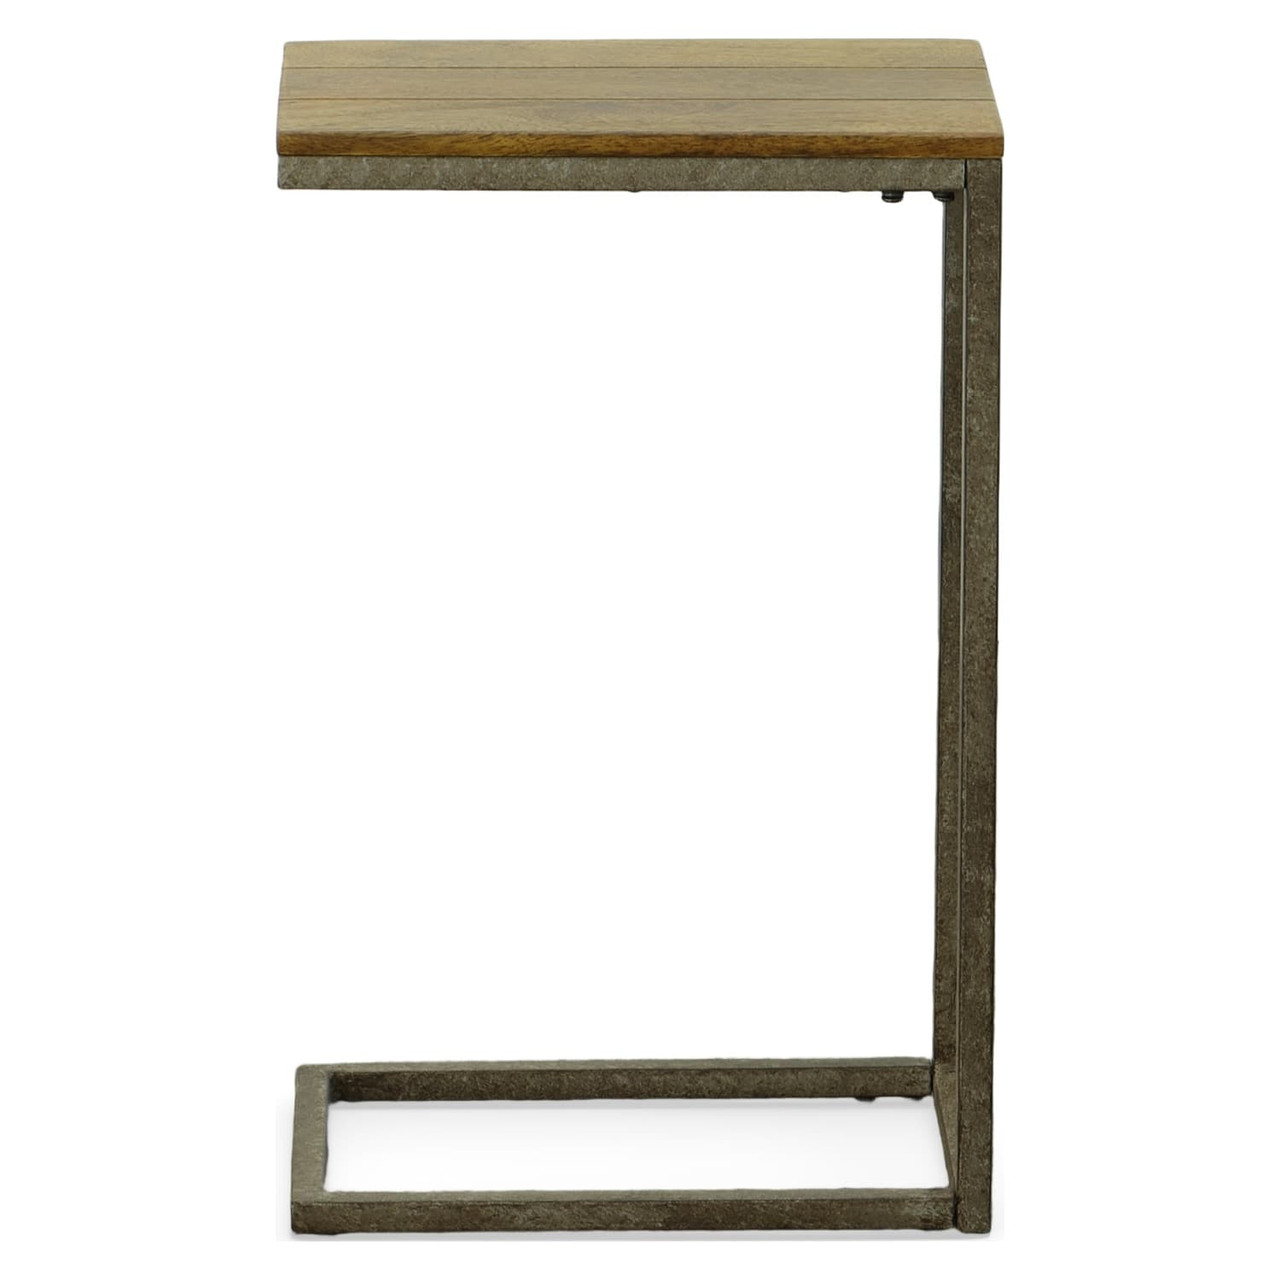 Aggie Computer Tray Table, Harvest Oak/Aged Iron